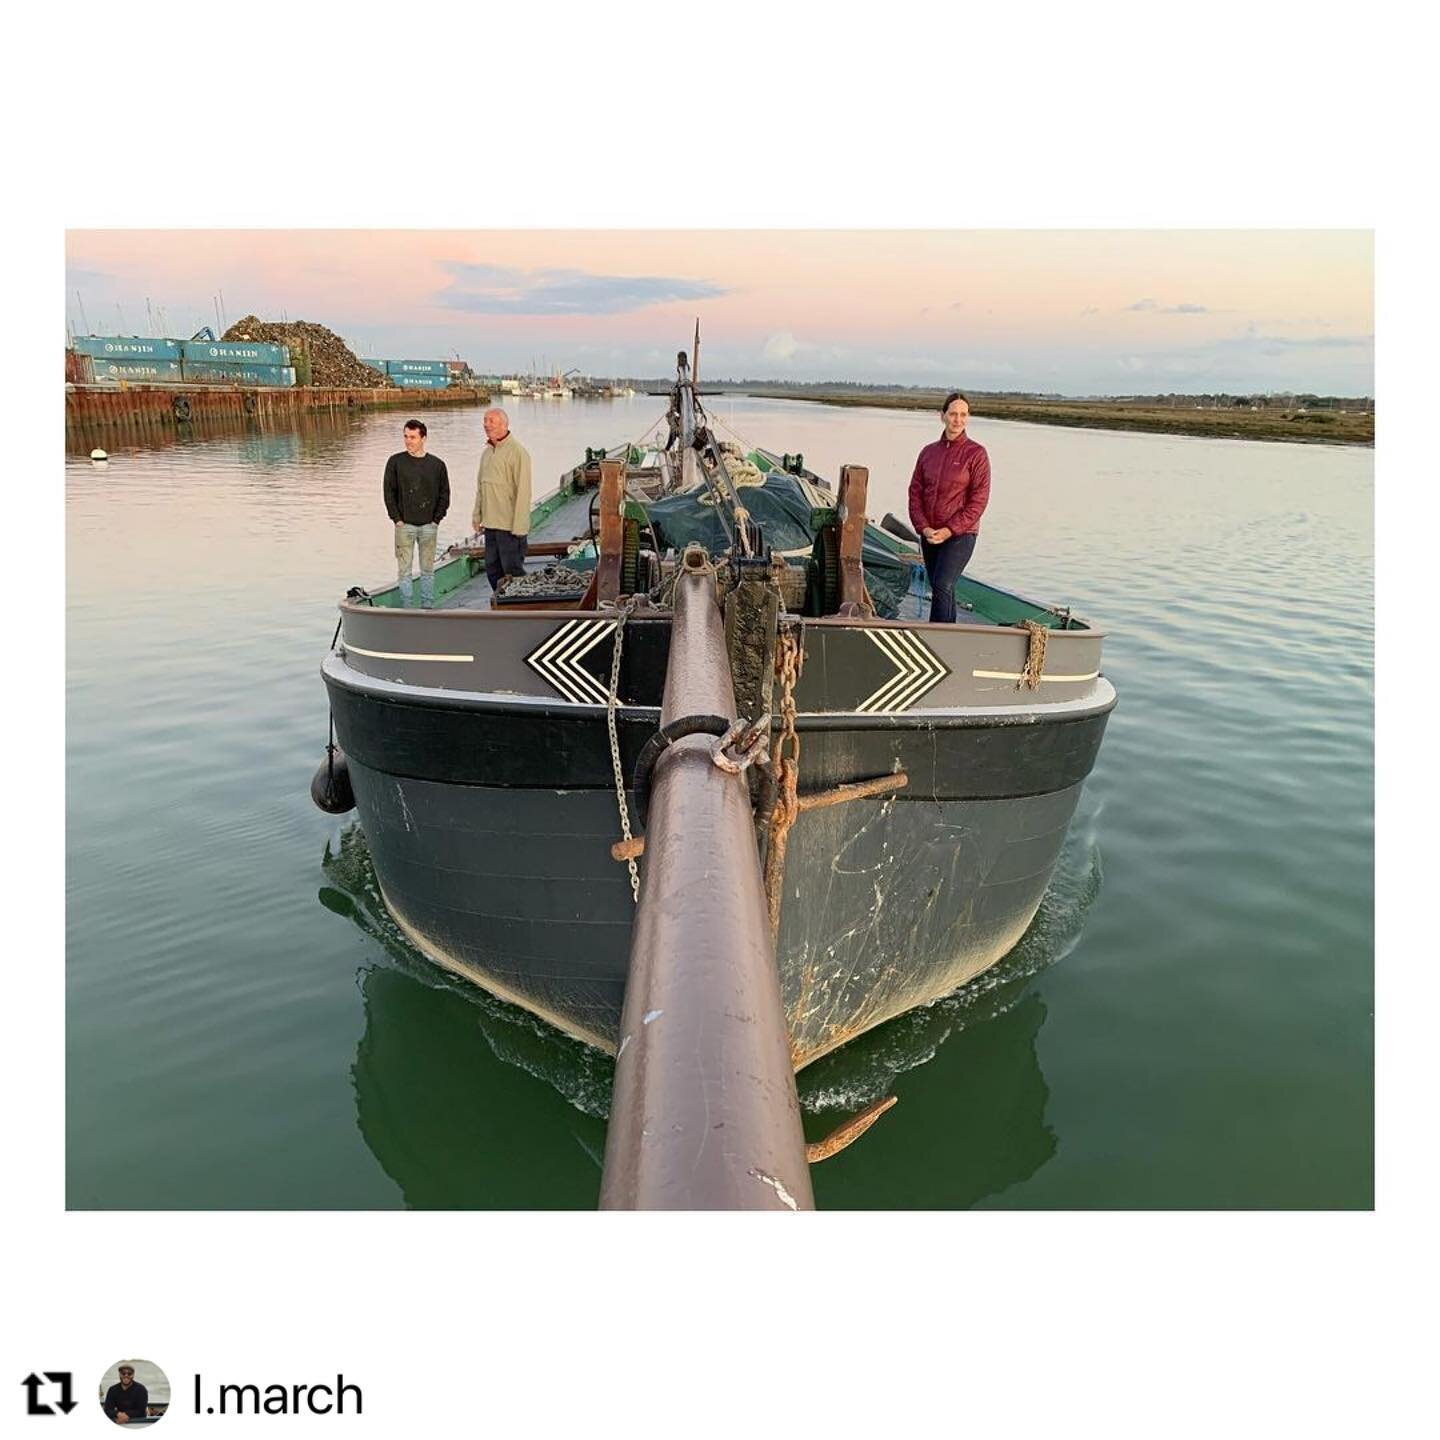 #Repost @l.march with @make_repost
・・・
Today at 4.04pm Sailing Barge Dawns Engines closed down for the last time. This week they leave the ship and she is set on the road to becoming a proper Thames Sailing Barge. No longer a momento to 1970s Barge c